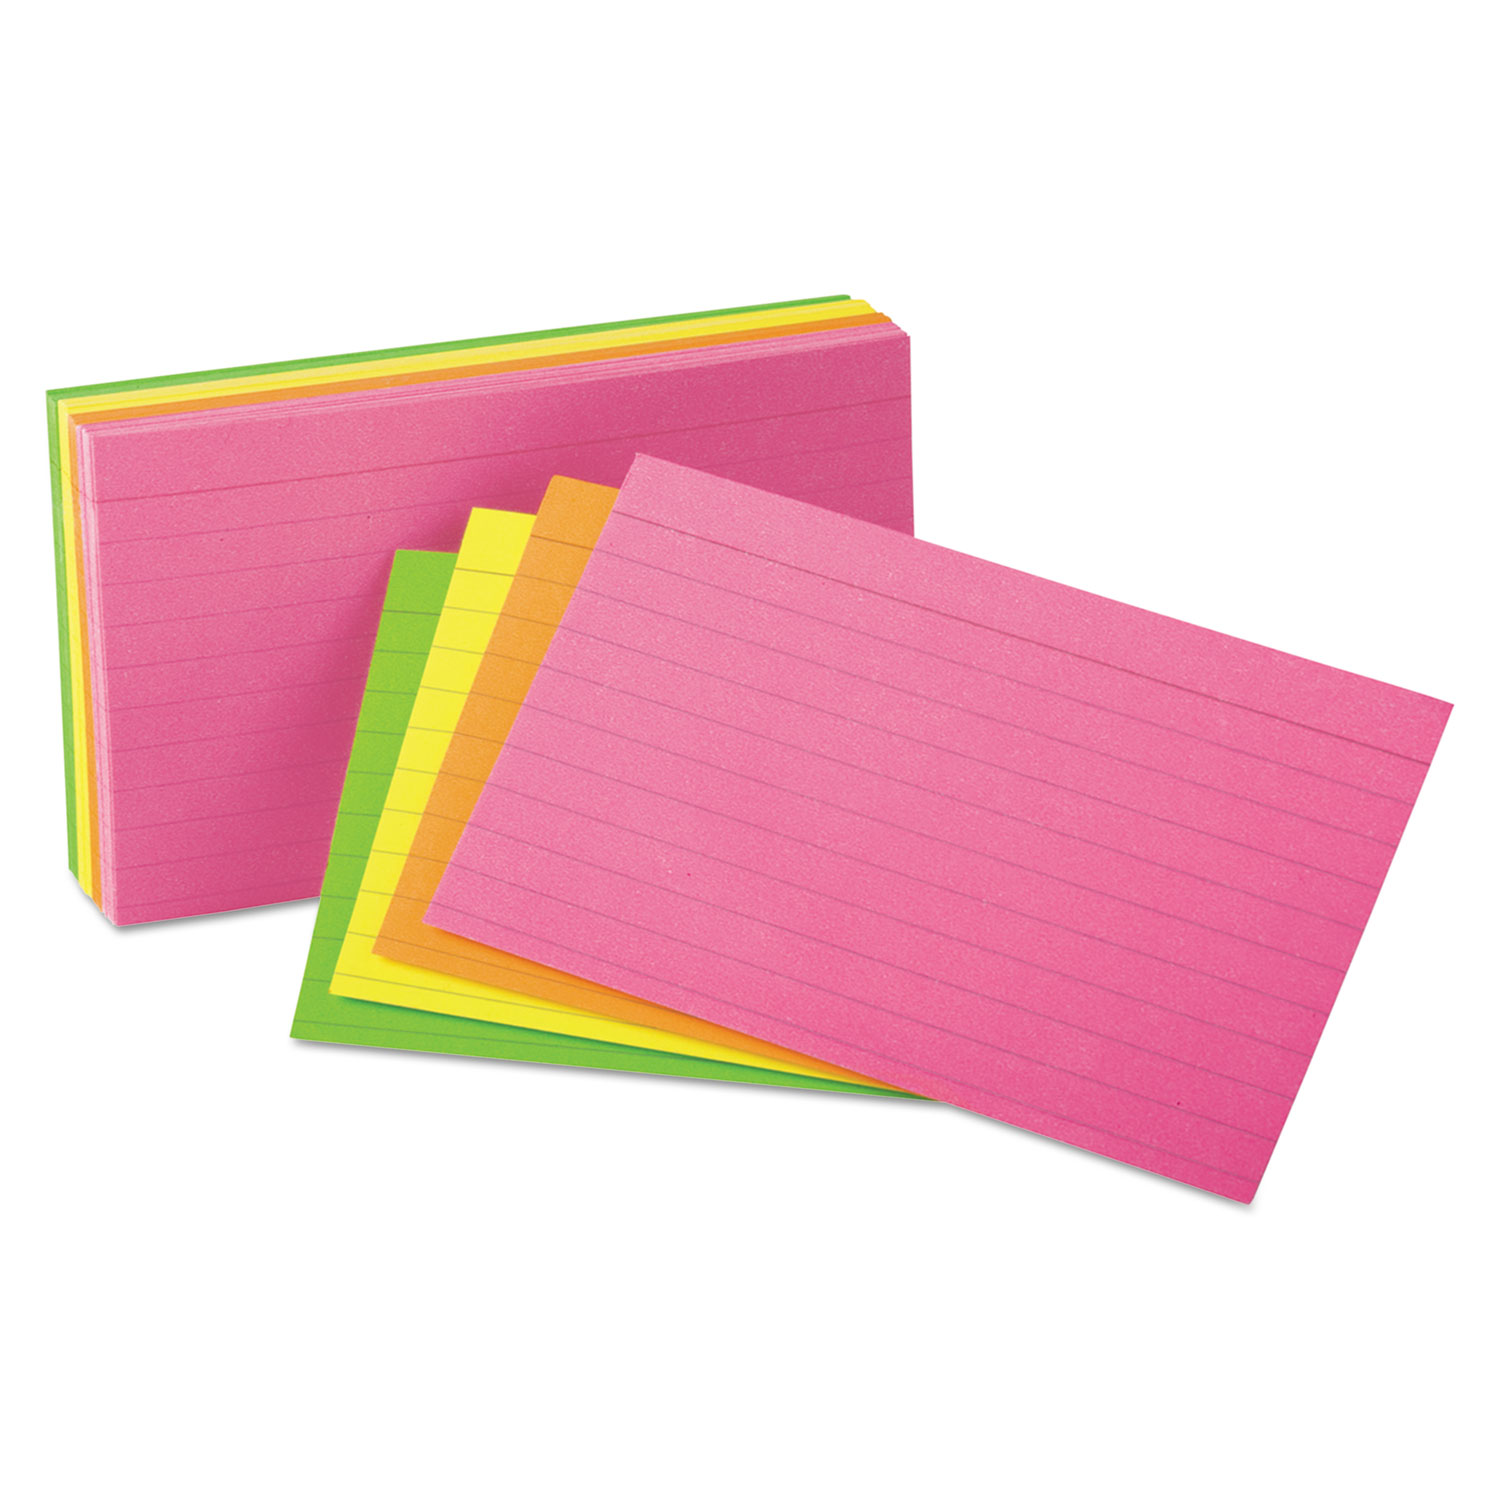  Oxford 40279 Ruled Index Cards, 3 x 5, Glow Green/Yellow, Orange/Pink, 100/Pack (OXF40279) 